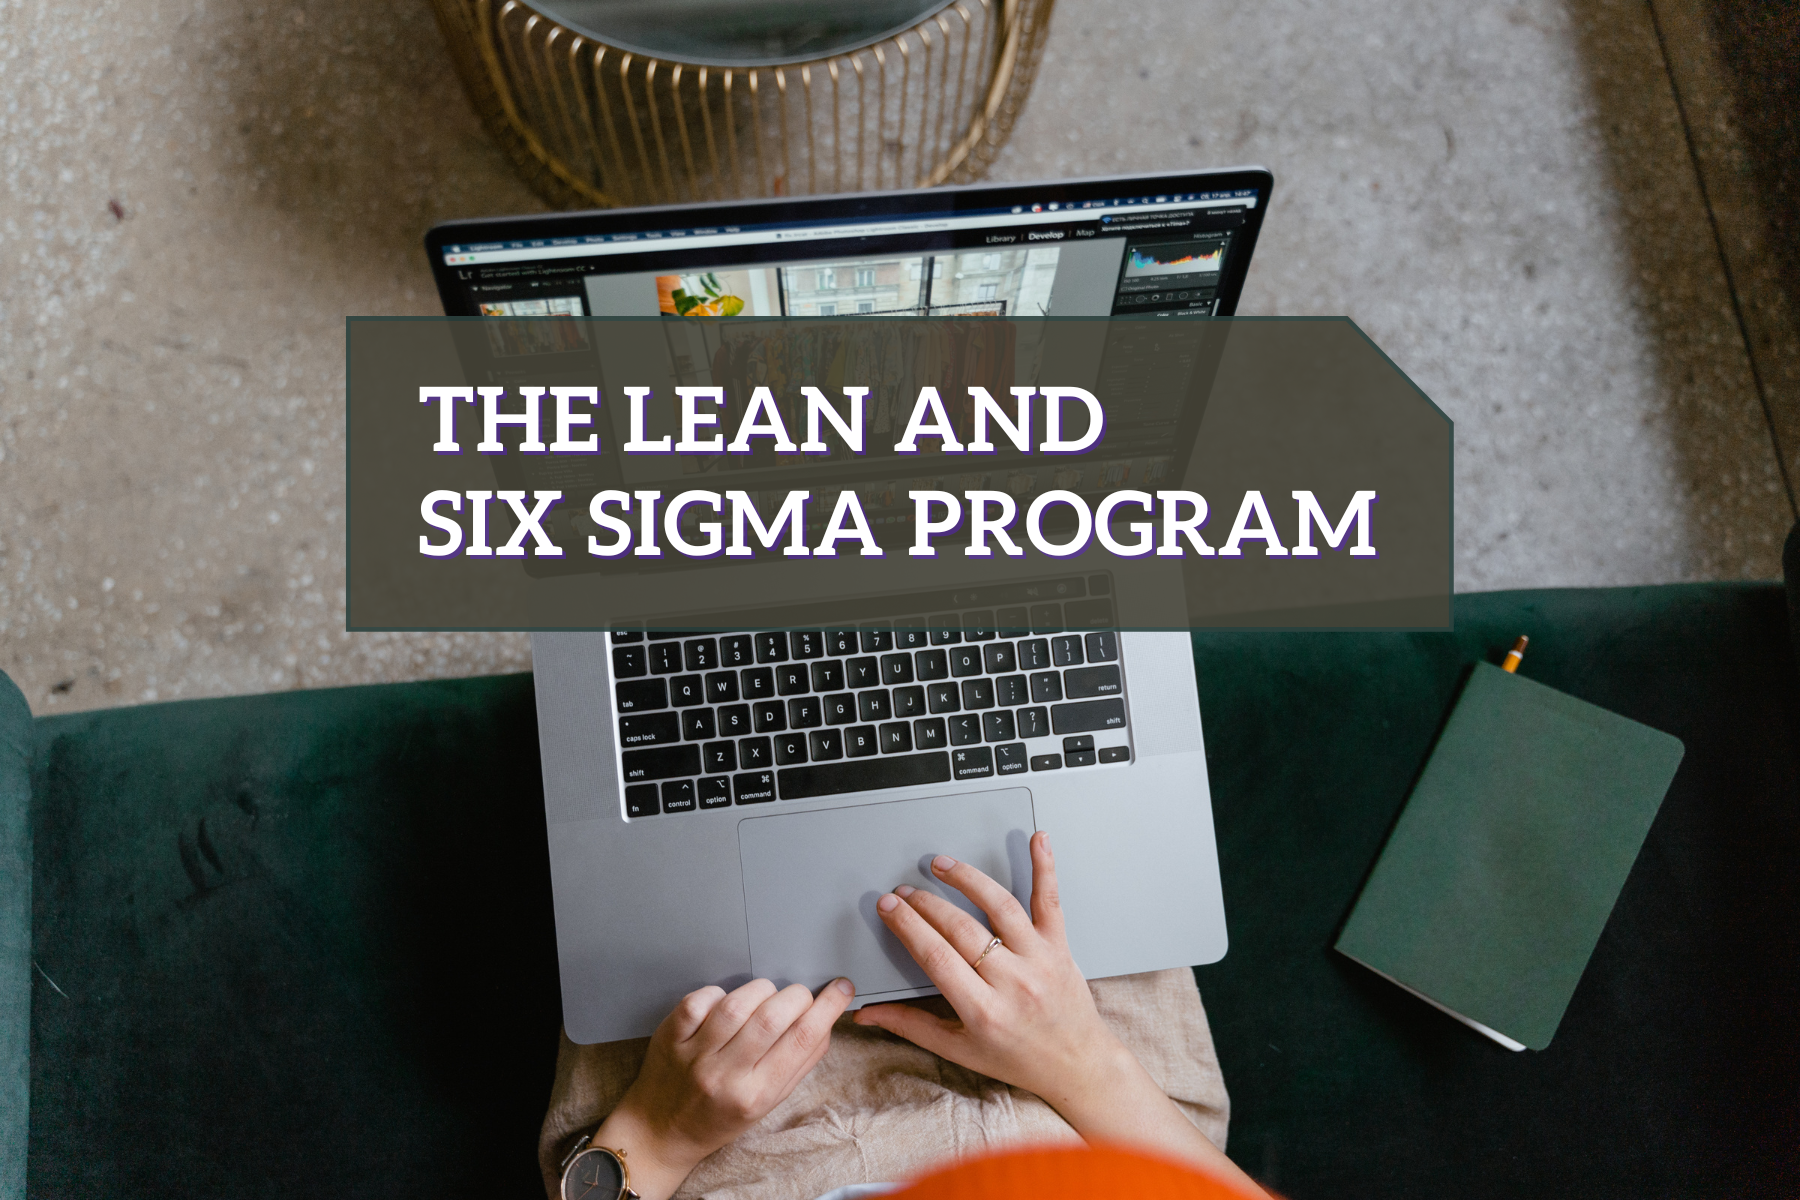 The Lean and Six Sigma Program